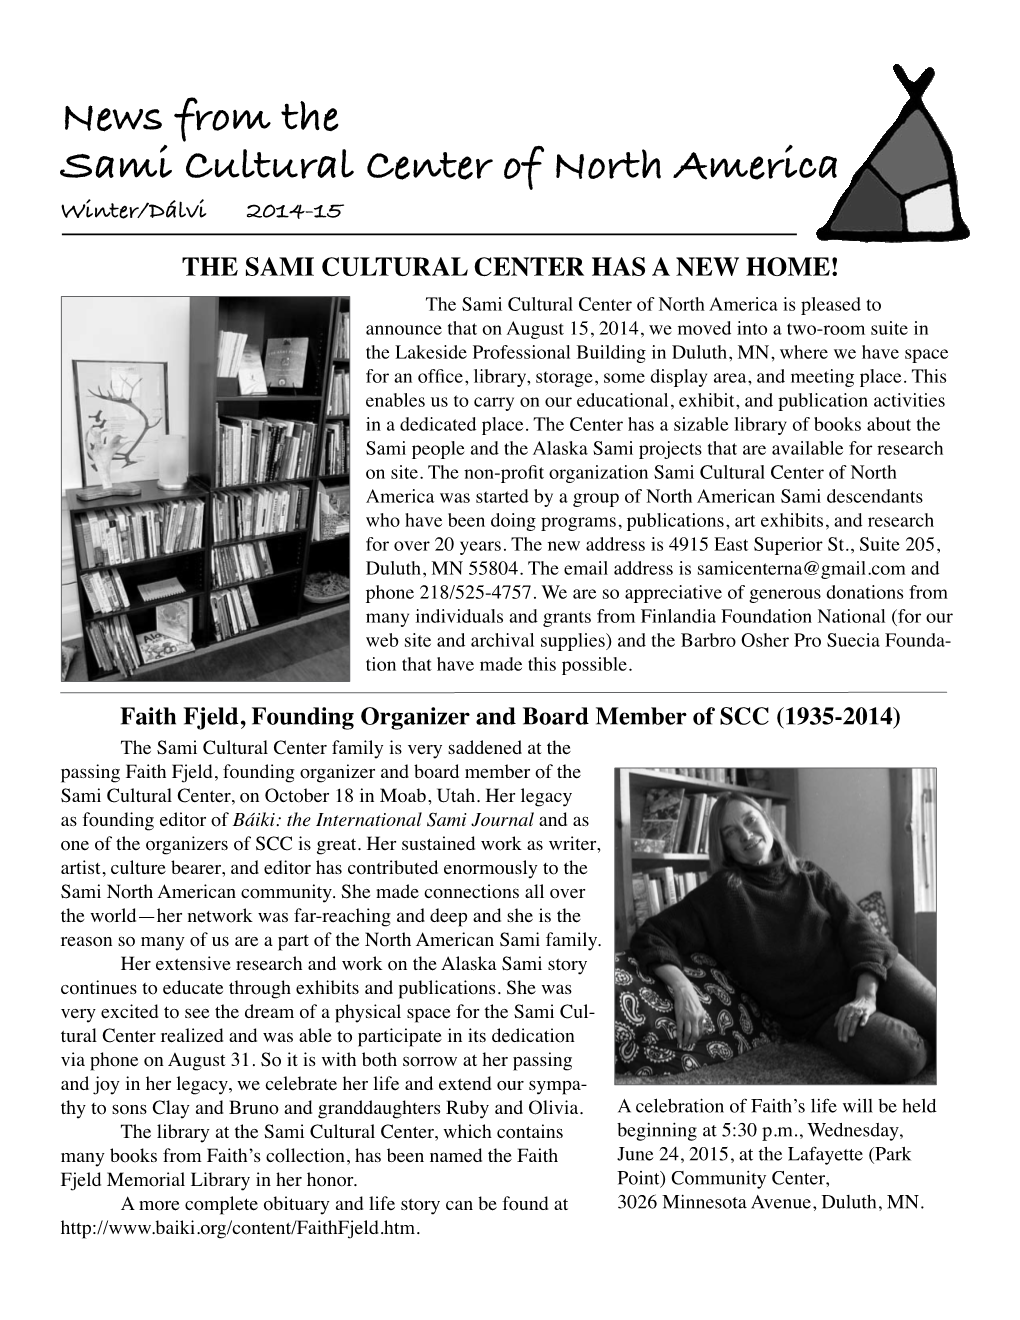 News from the Sami Cultural Center of North America Winter/Dálvi 2014-15